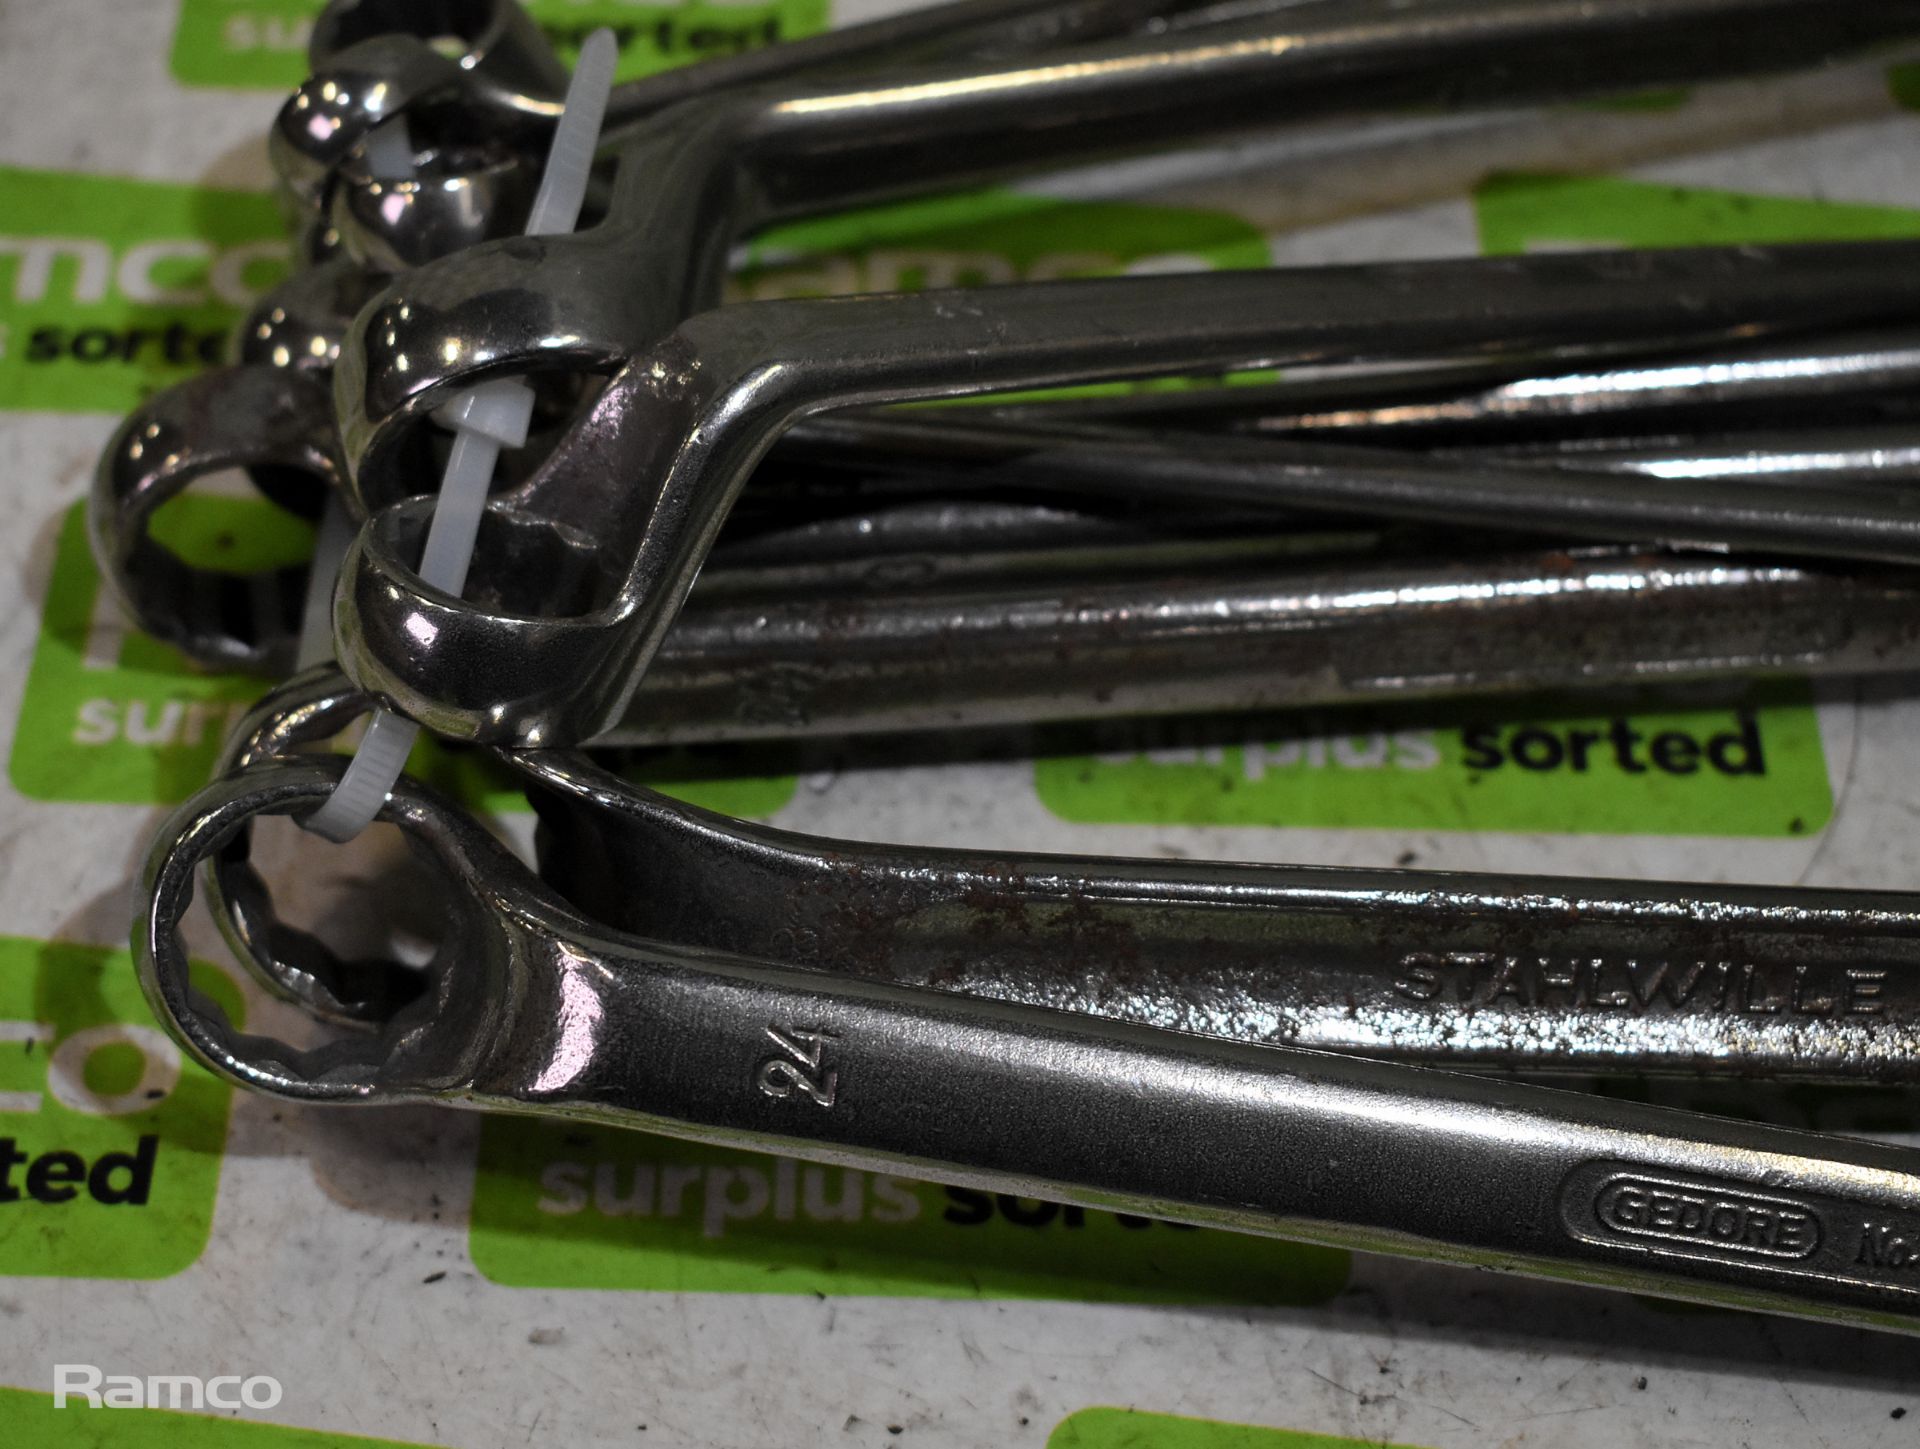 Spanners - various sizes from 8-32mm - Image 2 of 2